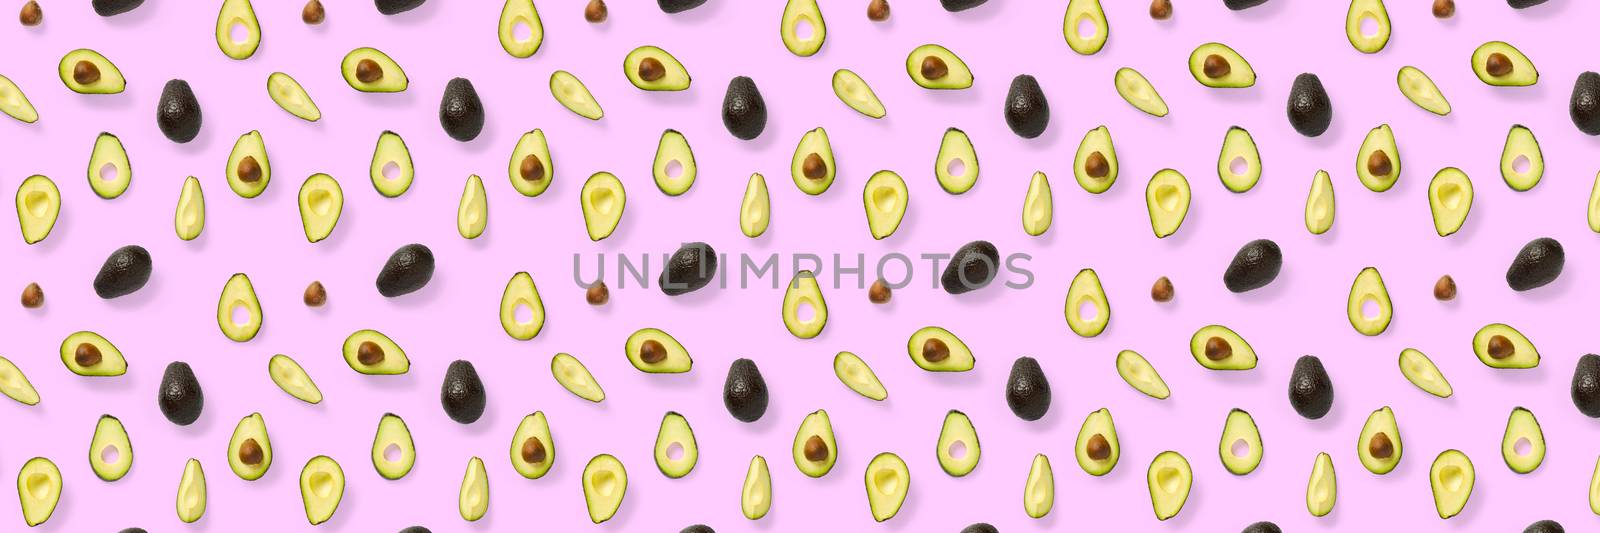 Avocado banner. Background made from isolated Avocado pieces on pink background. Flat lay of fresh ripe avocados and avacado pieces. by PhotoTime